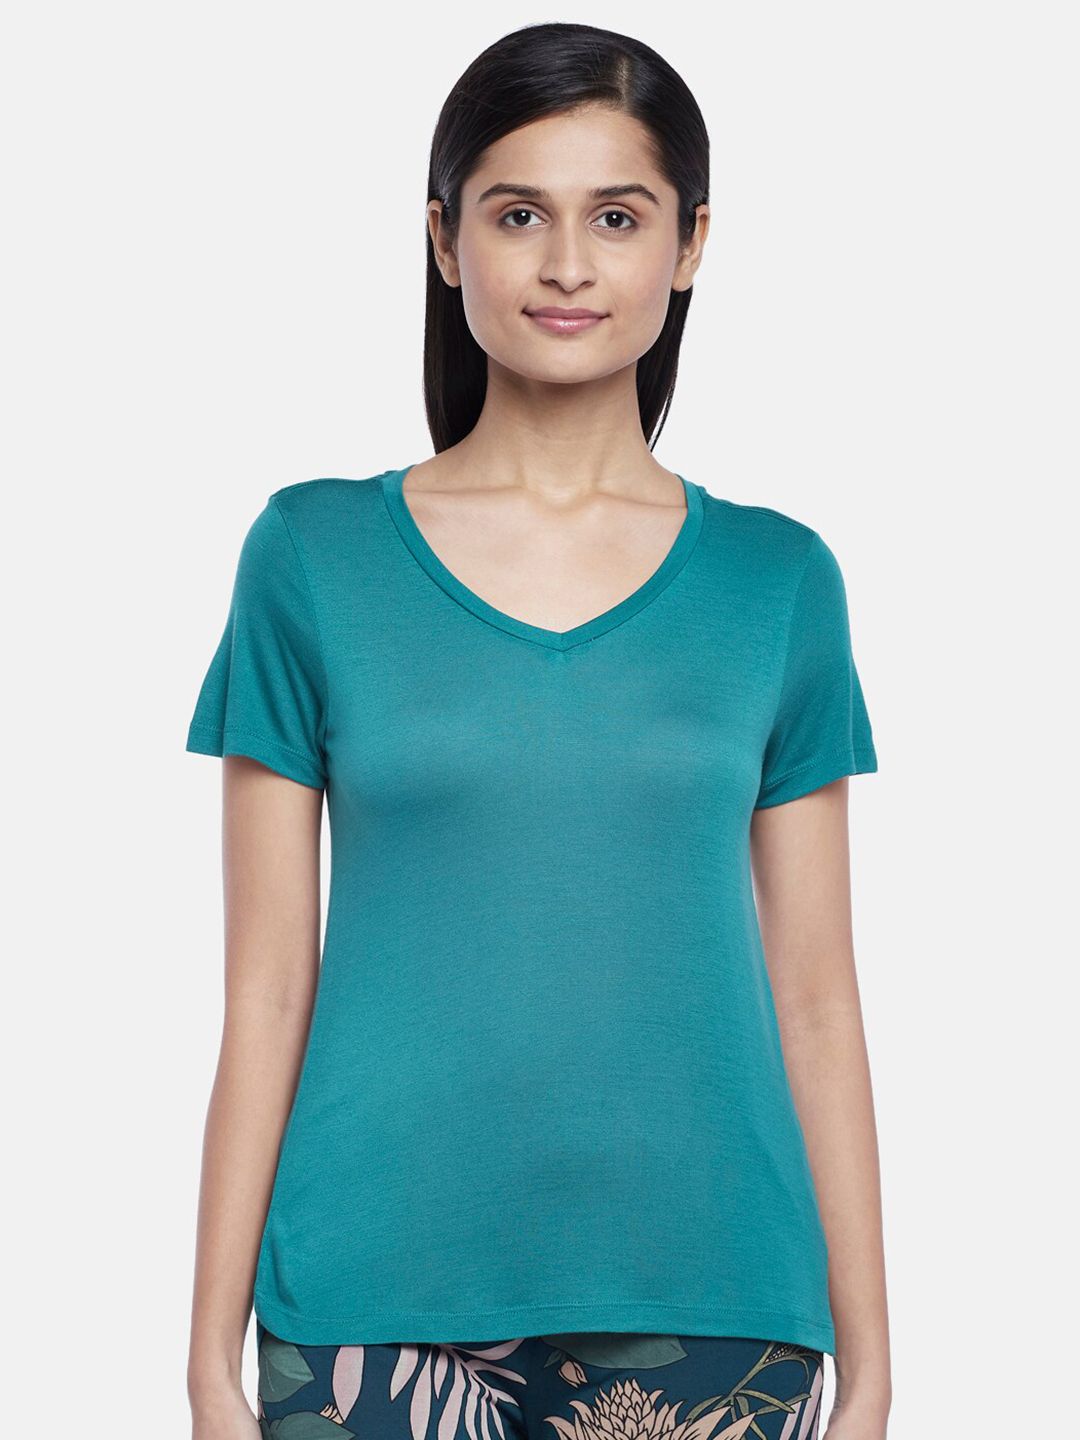 Dreamz by Pantaloons Teal Blue V-Neck Lounge tshirt Price in India